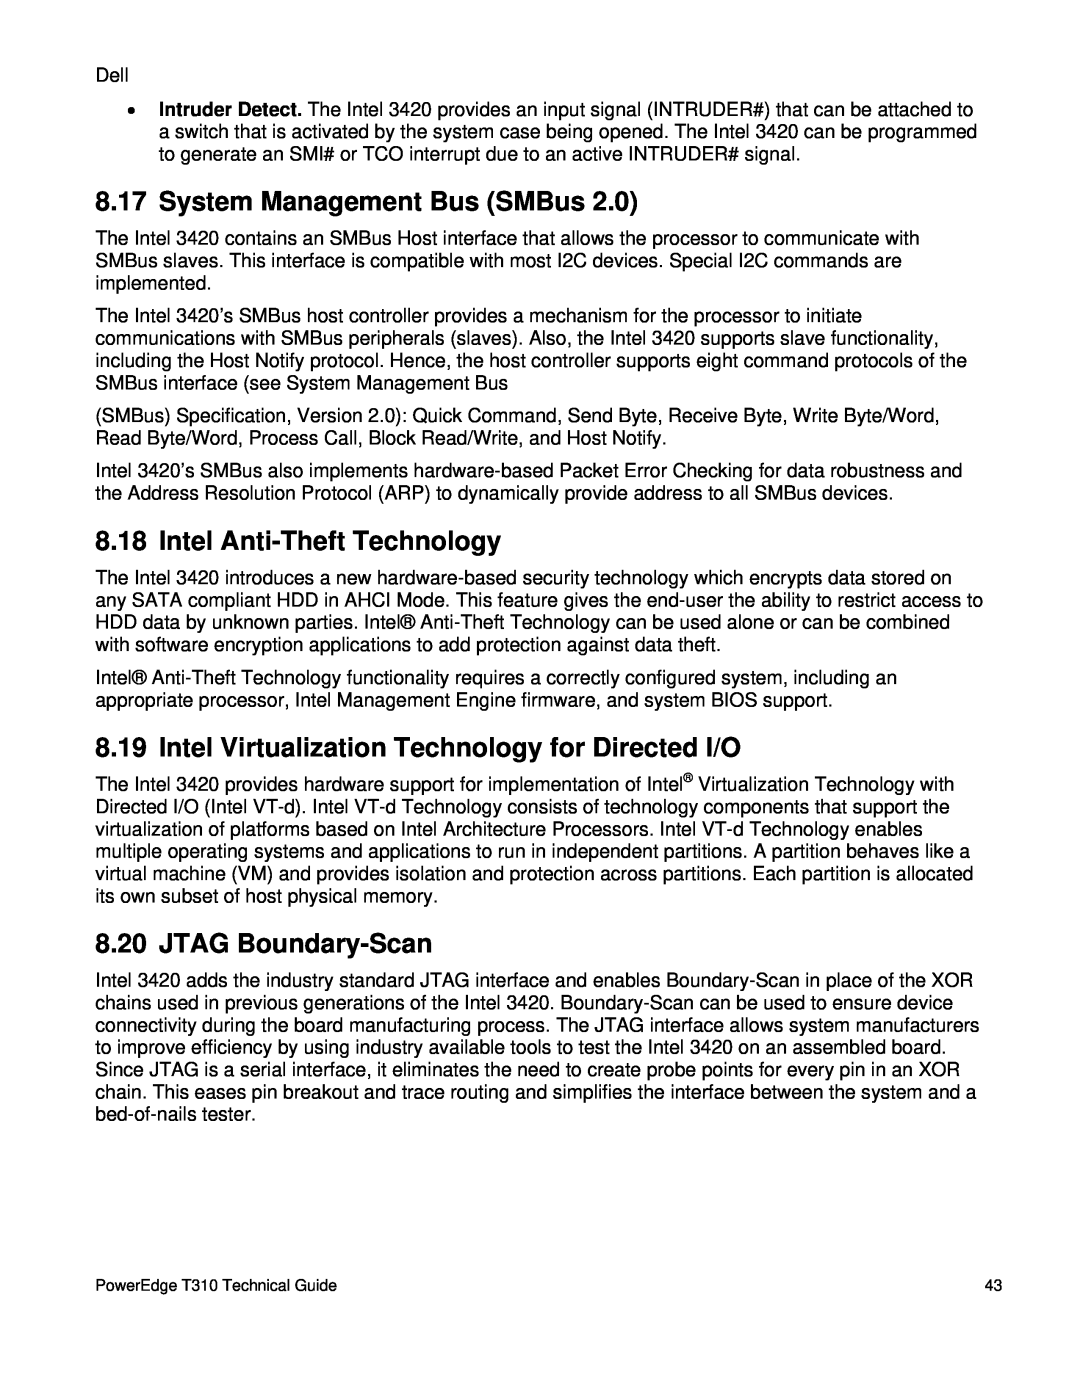 Dell T310 manual System Management Bus SMBus, Intel Anti-Theft Technology, Intel Virtualization Technology for Directed I/O 